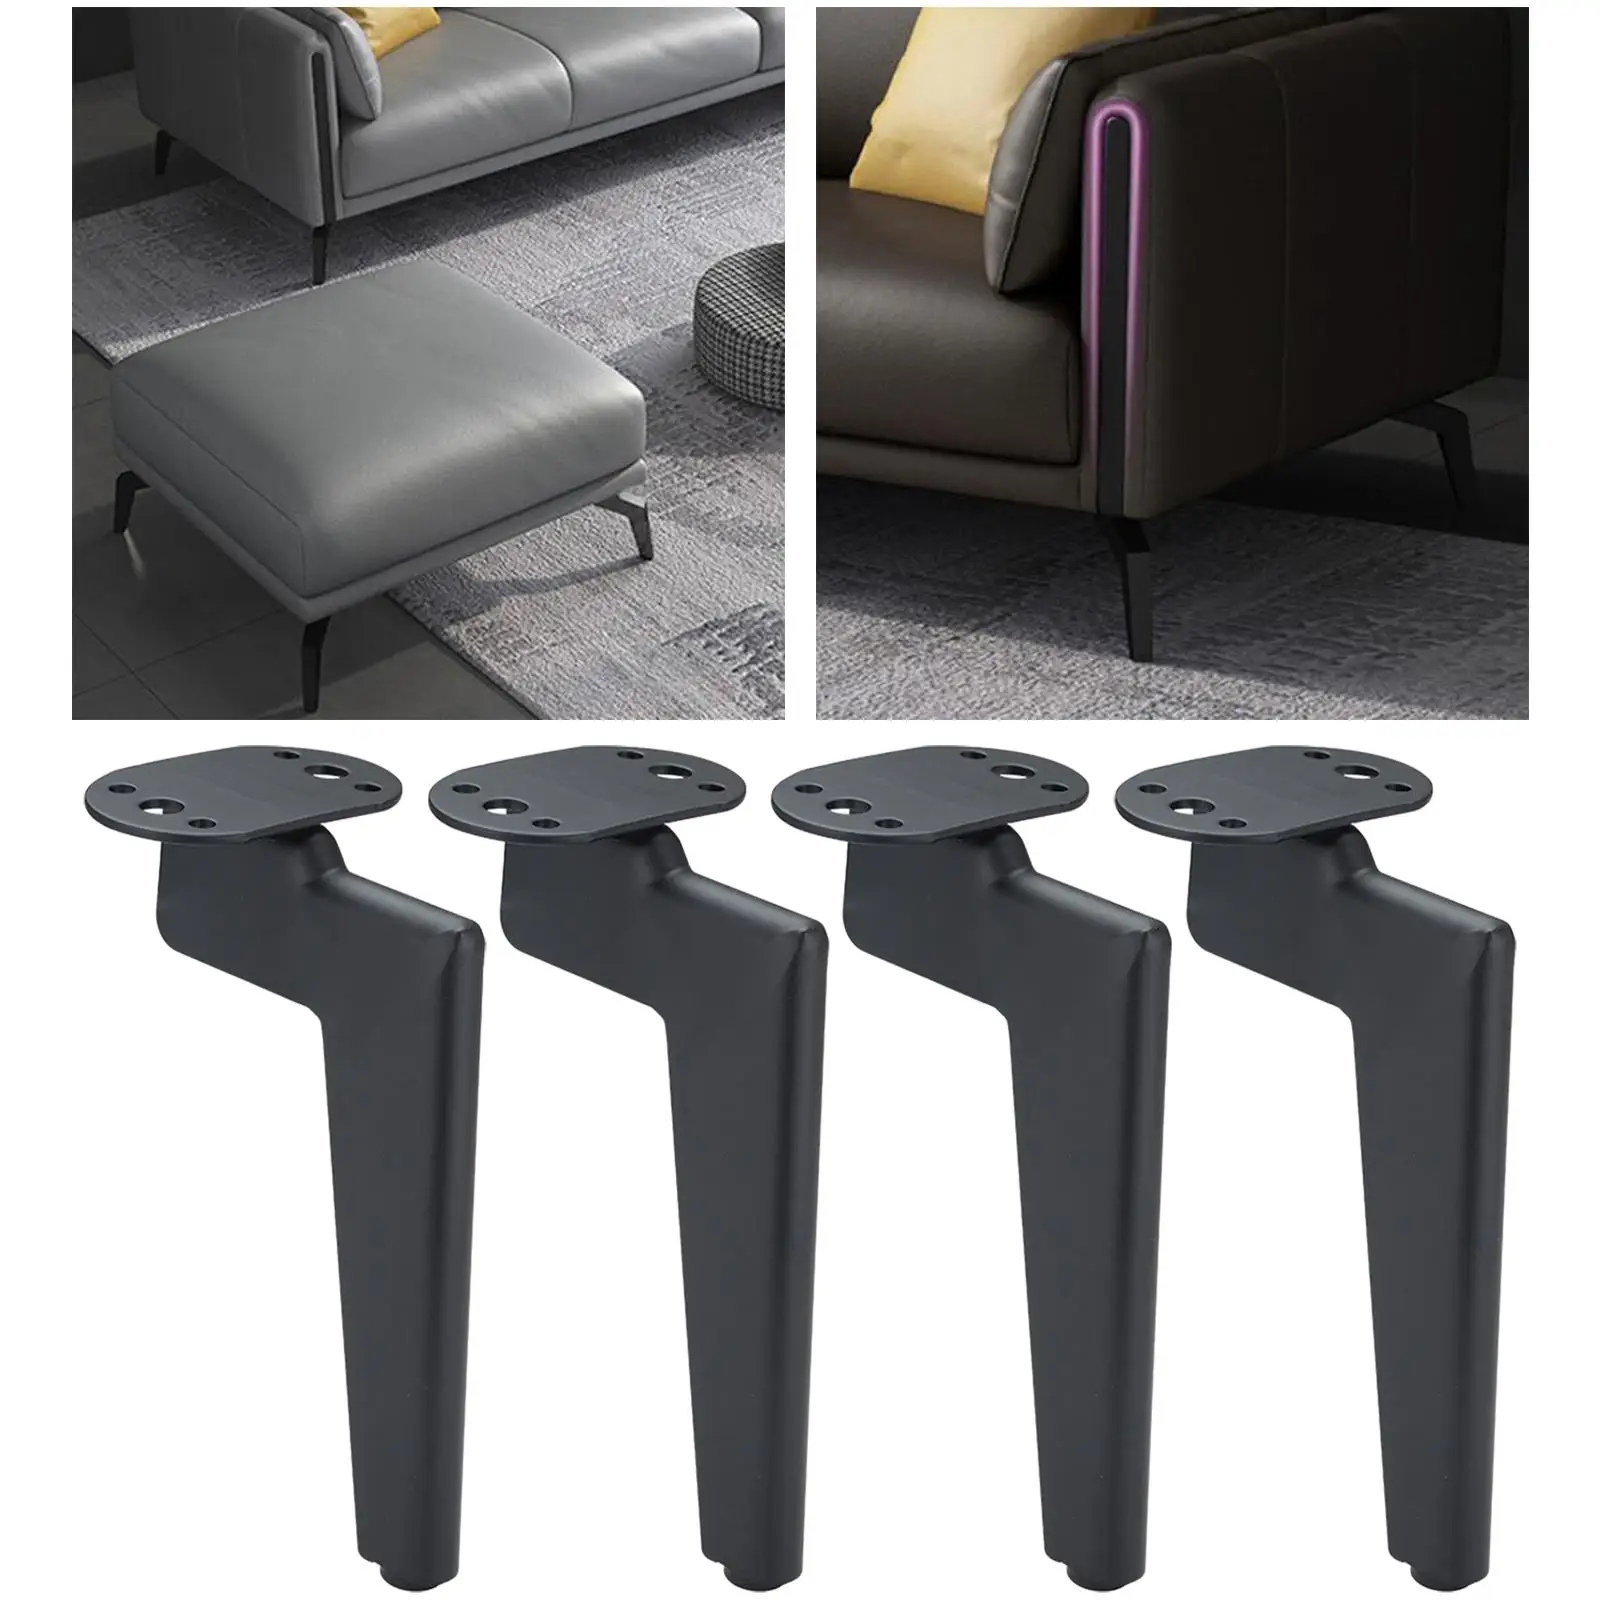 4 Pieces Modern Furniture Legs Decorative Sofa Legs Replaceable Parts for Cabinet Furniture Cupboard Couch Bookcase